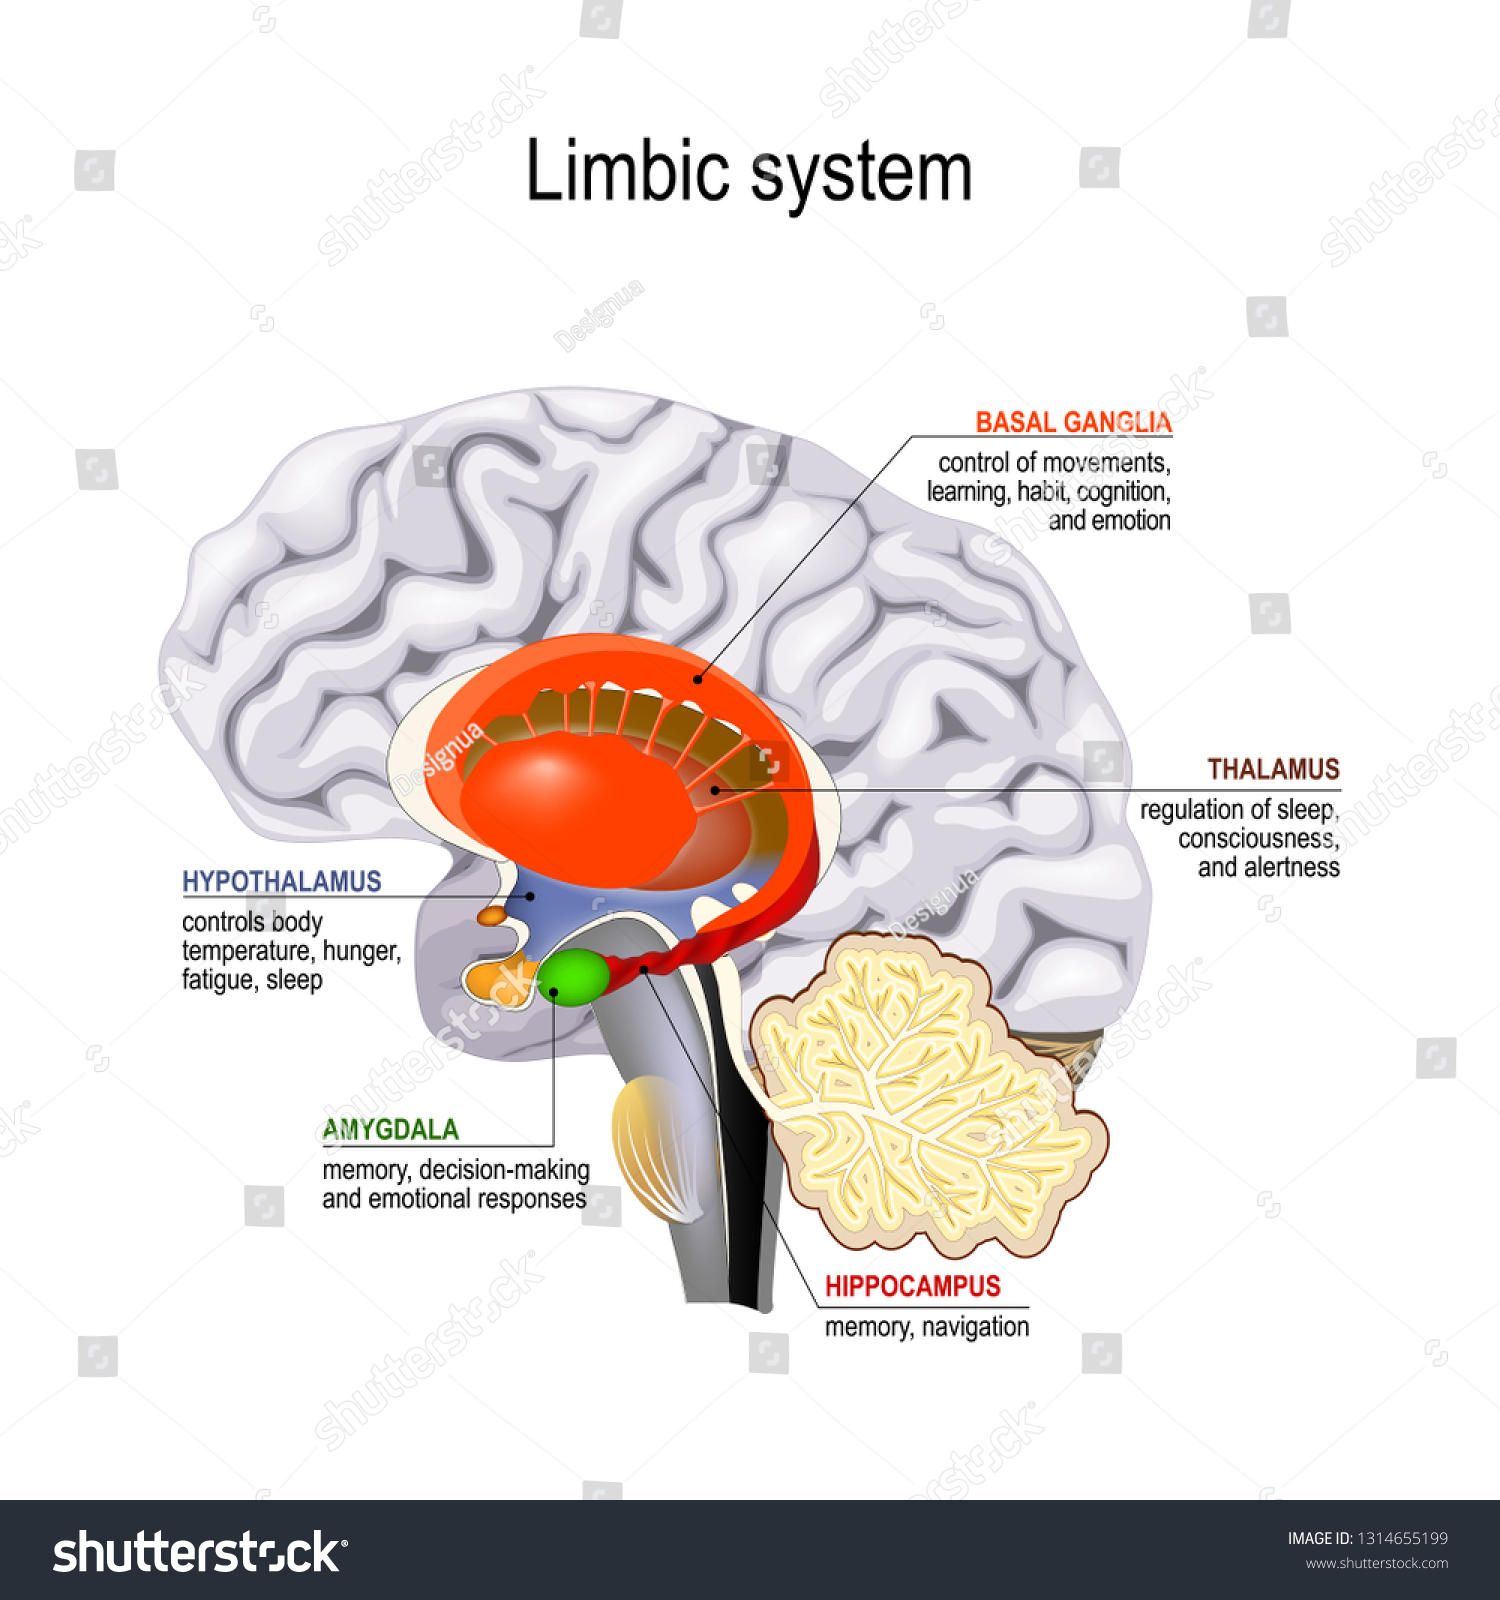 SVG of limbic system. Cross section of the human brain. Anatomical components of limbic system: Mammillary body, basal ganglia, pituitary gland, amygdala, hippocampus, thalamus, cingulate gyrus svg